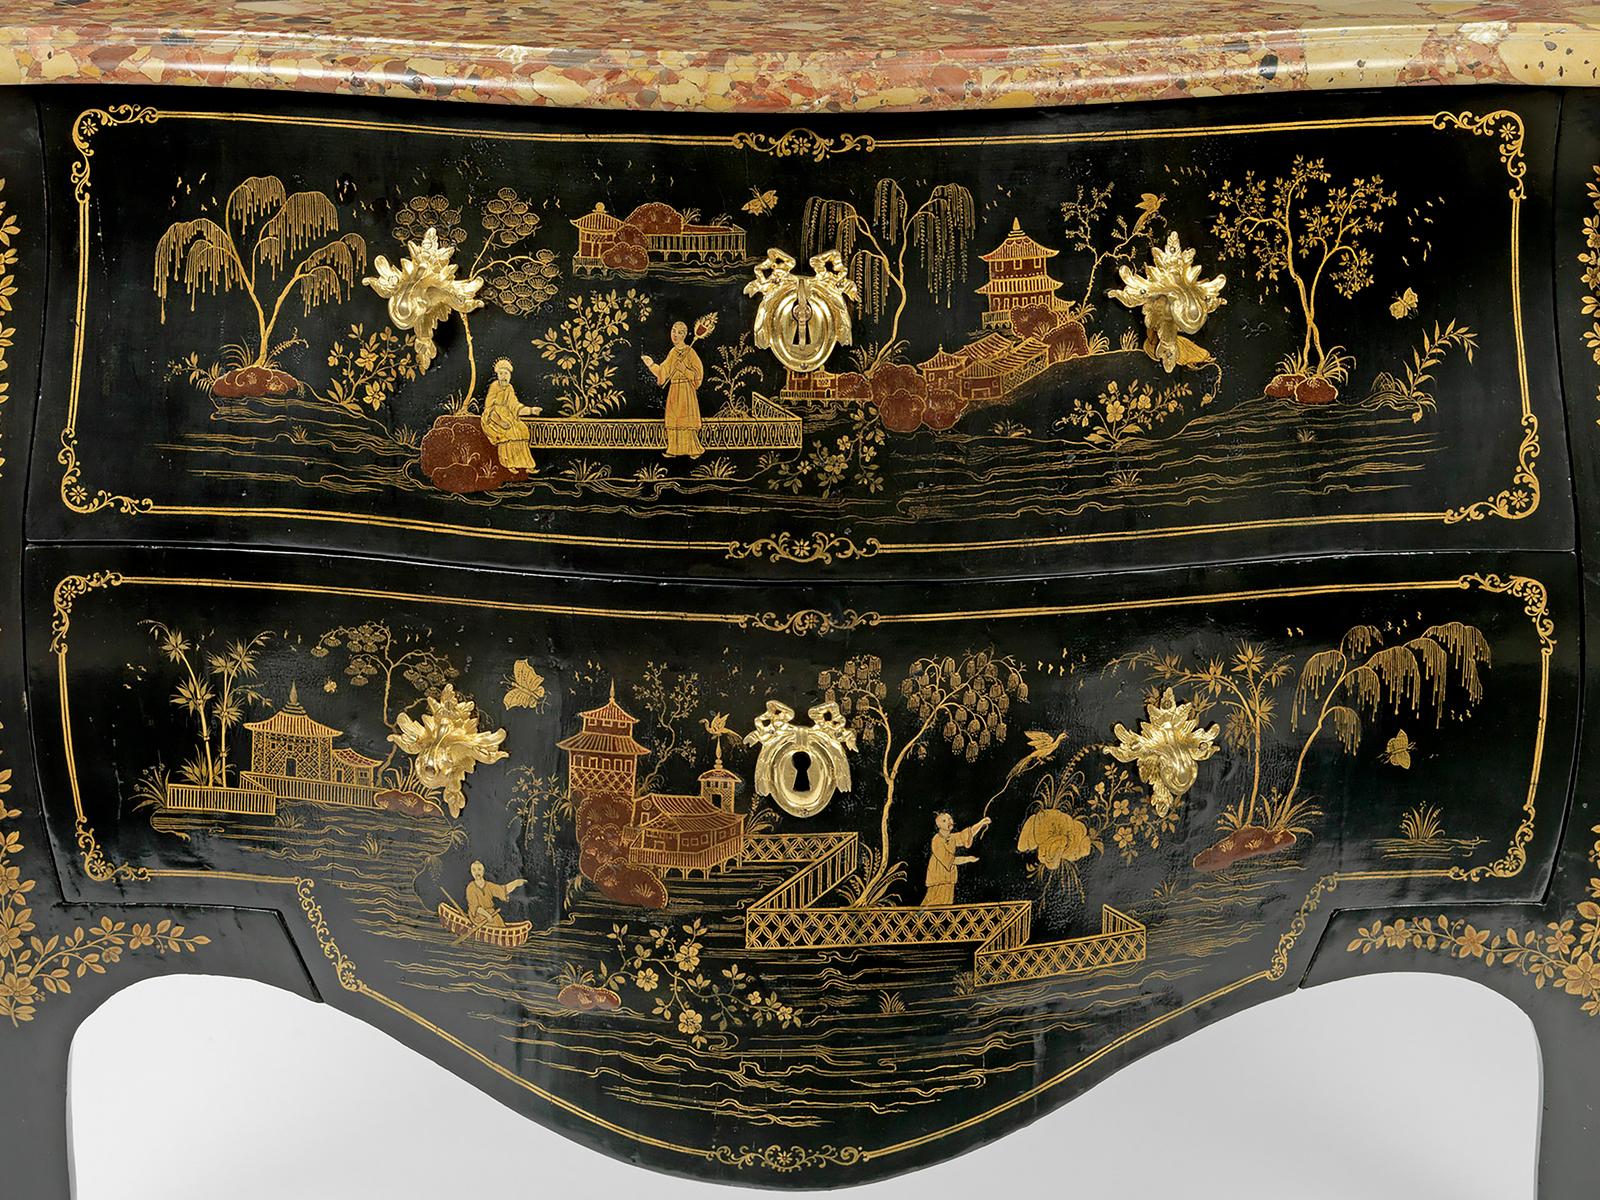 The serpentine-fronted, bombé commode decorated with French japanning has a moulded brêche violet marble top, above two deep drawers, the lower one with a shaped apron. The sides have similar decorated panels and the shoulders are headed with ormolu